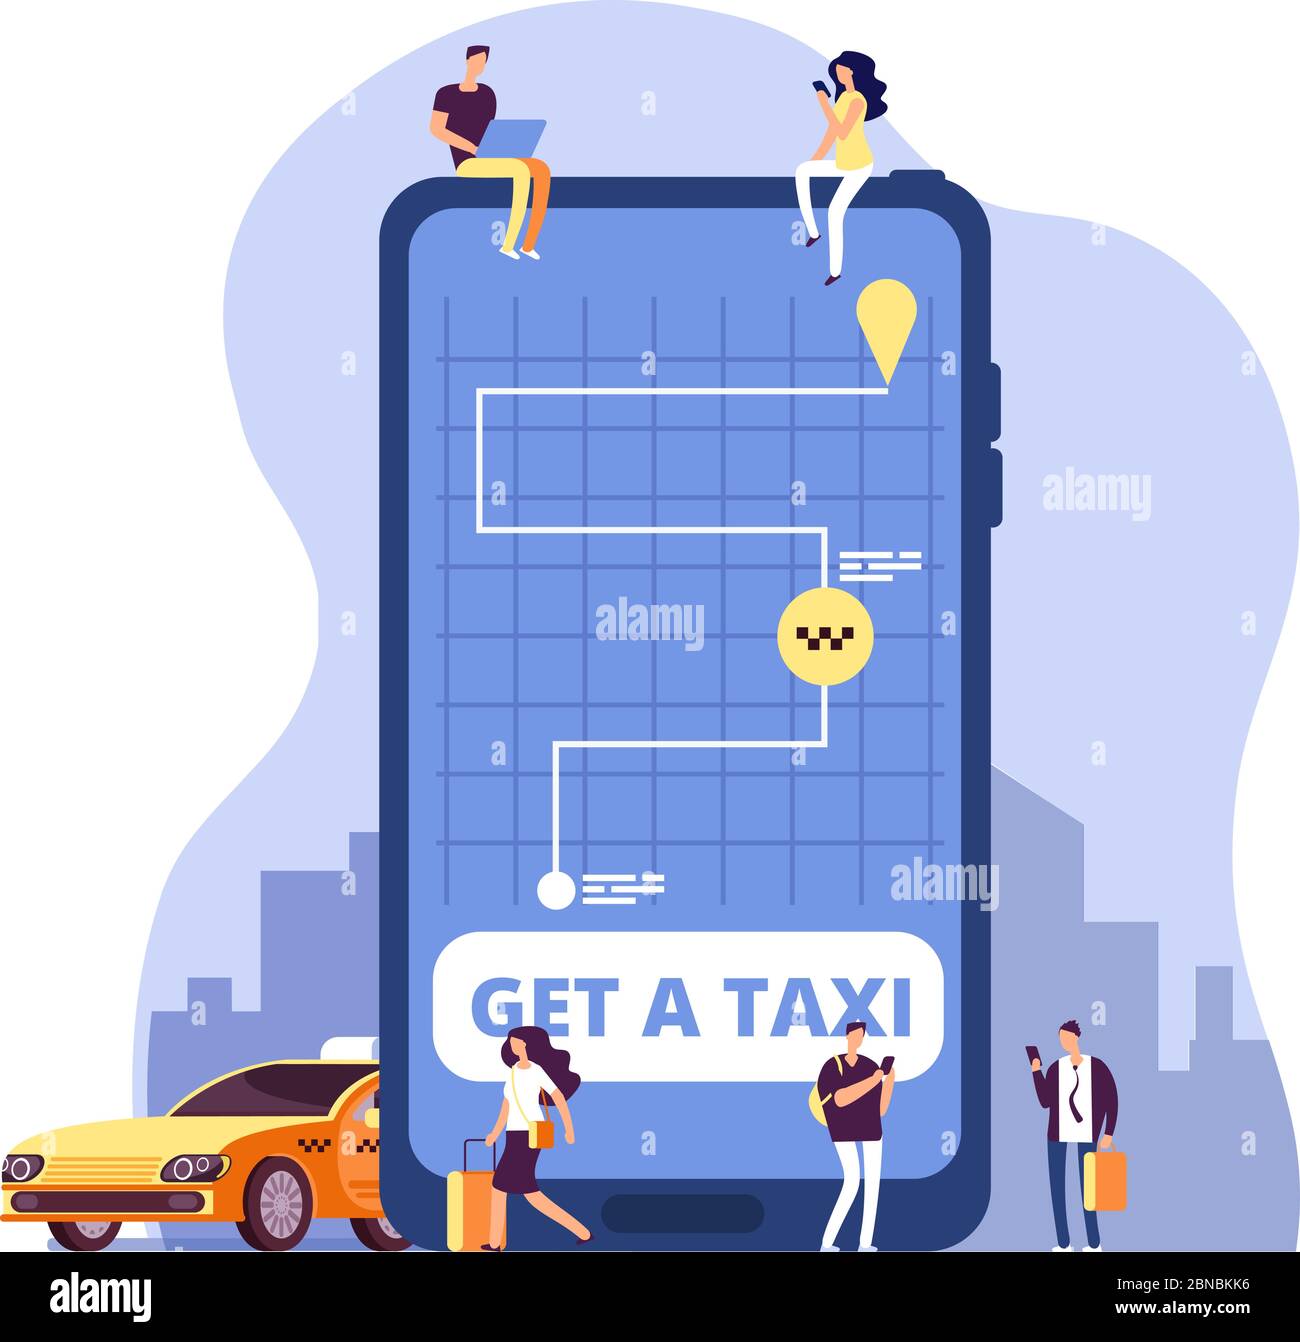 Mobile taxi. Online taxi service and payment with smartphone app. People ordering taxi at huge cell phone. Vector concept online taxi transportation, app mobile service illustration Stock Vector